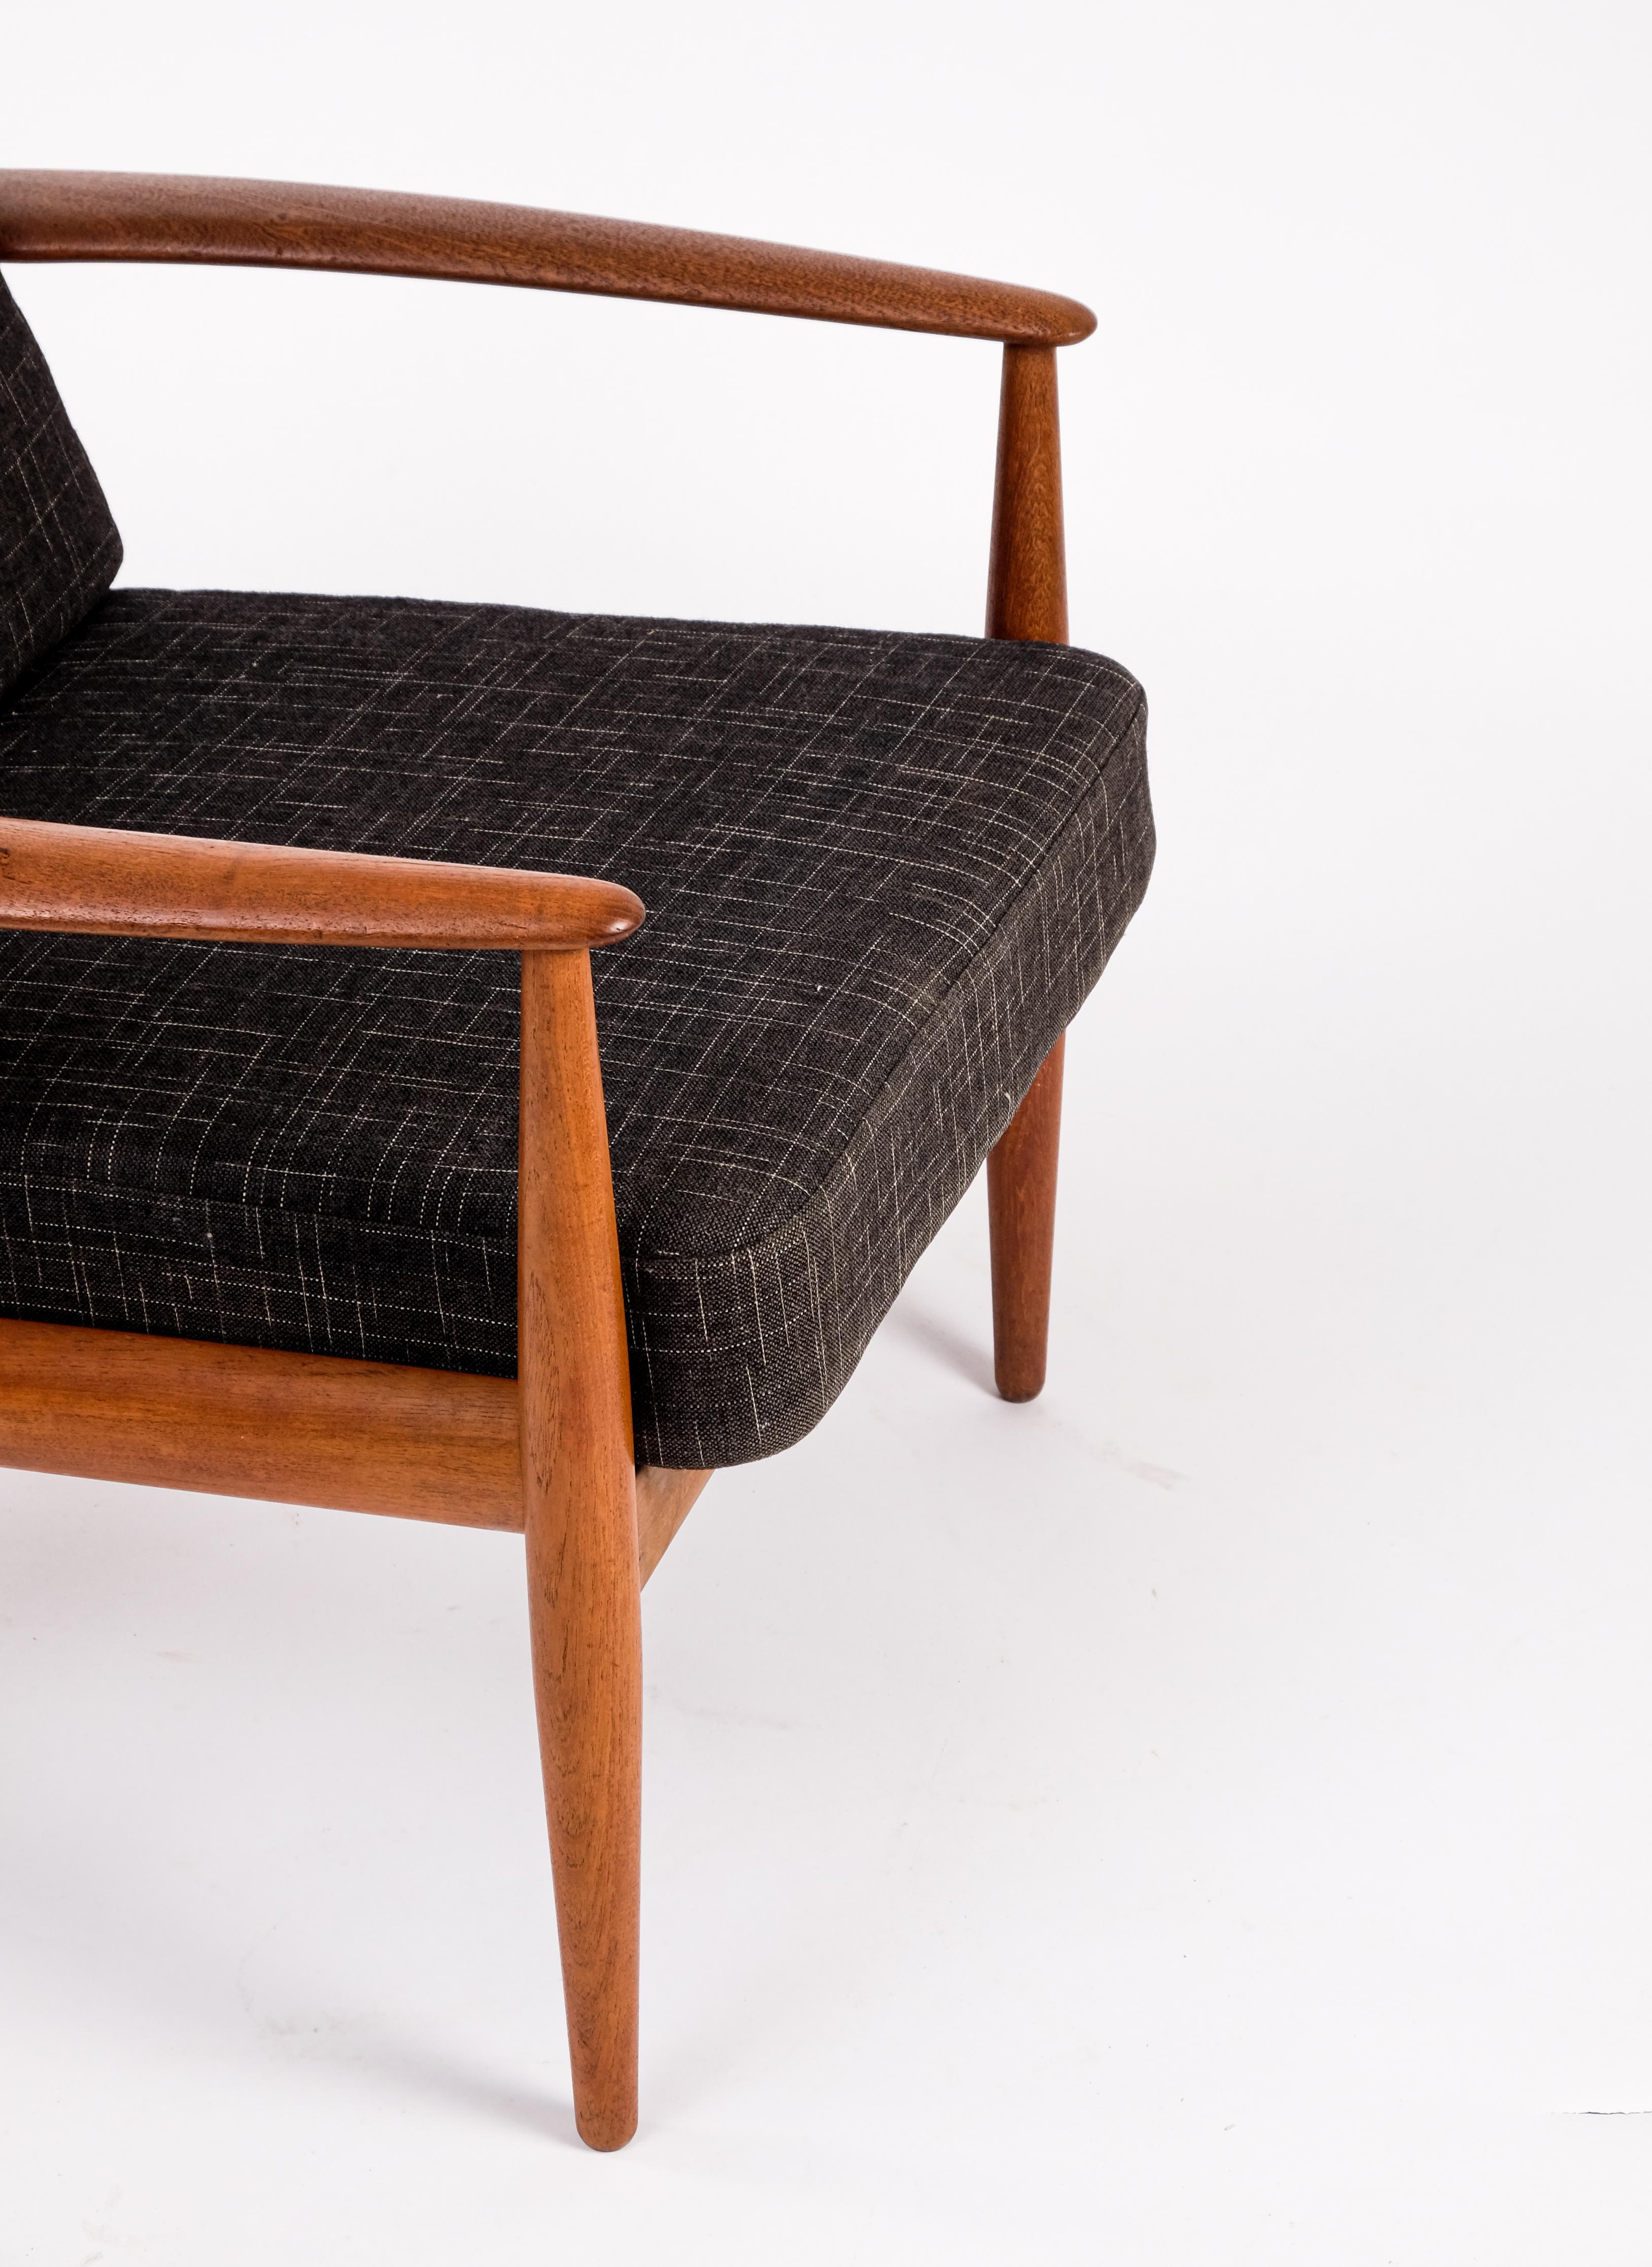 Pair of Grete Jalk Easy Chairs, Denmark, 1960s For Sale 4